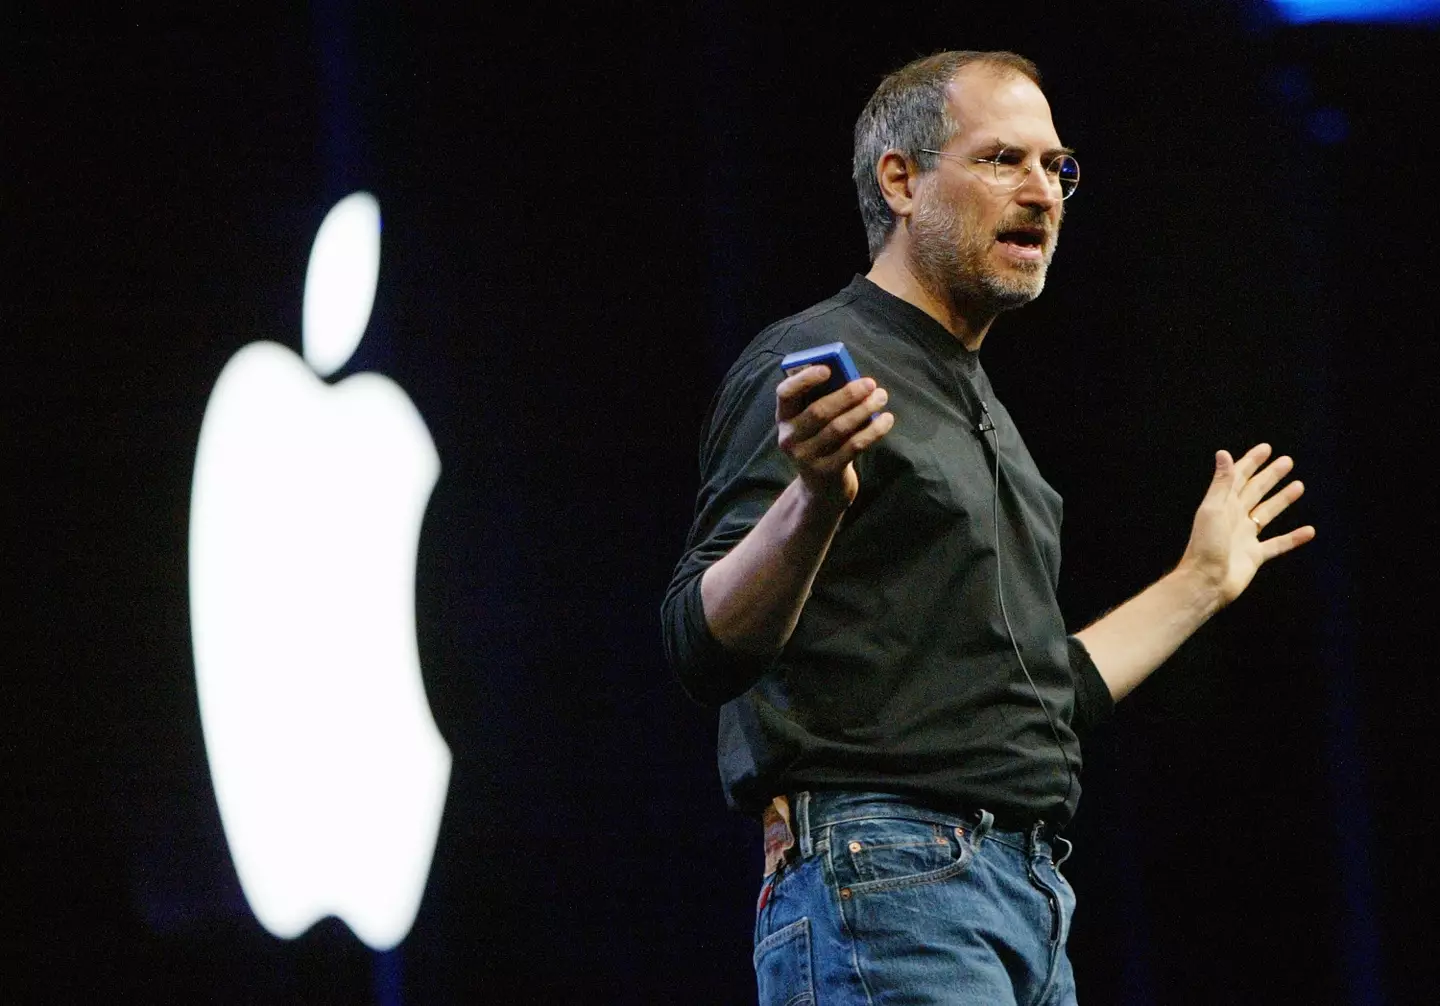 Steve Jobs was the CEO of Apple.